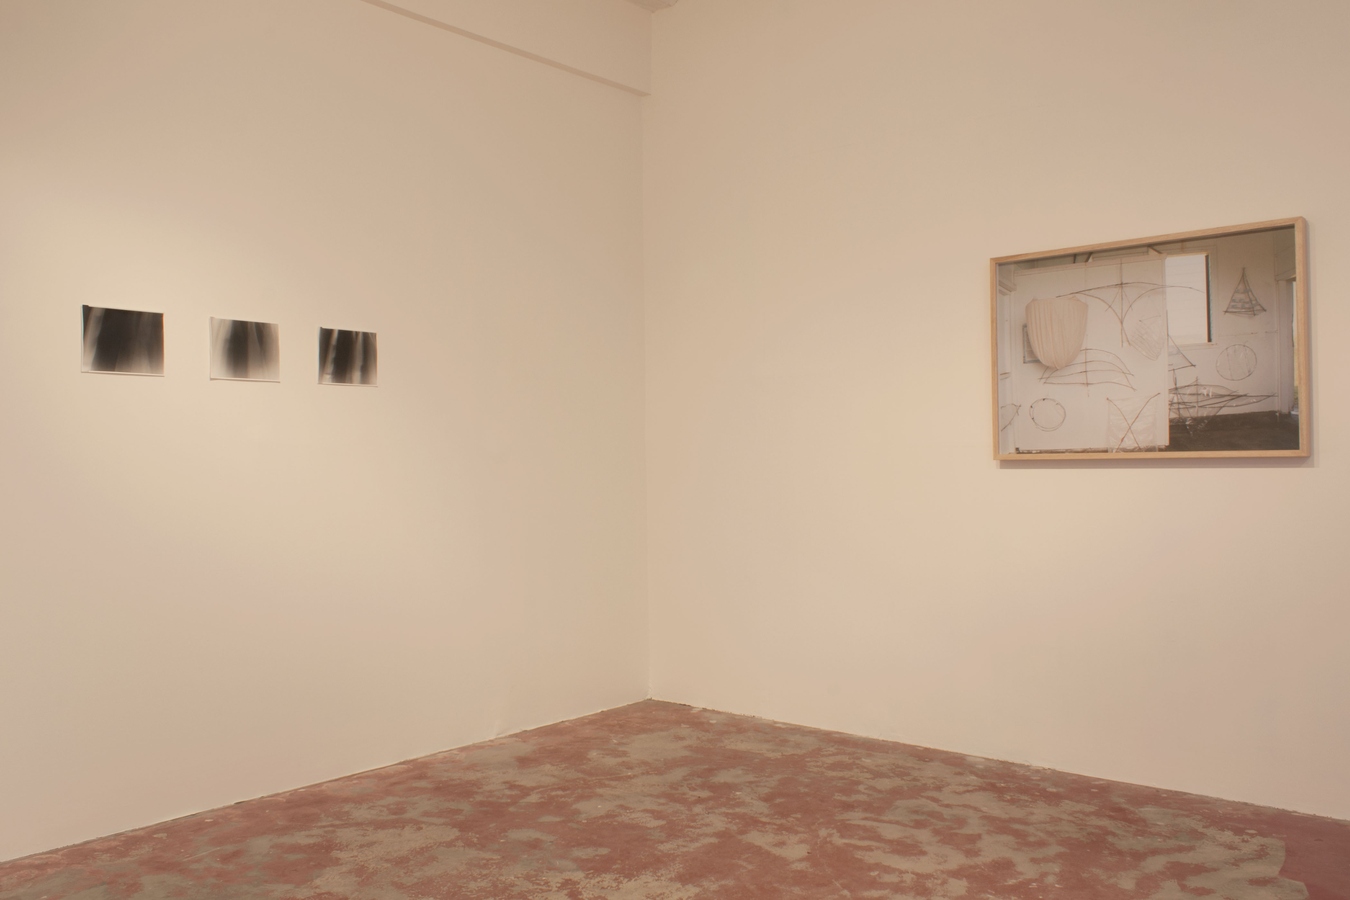 Eleanor Cooper, They say this island changes shape, Installation view